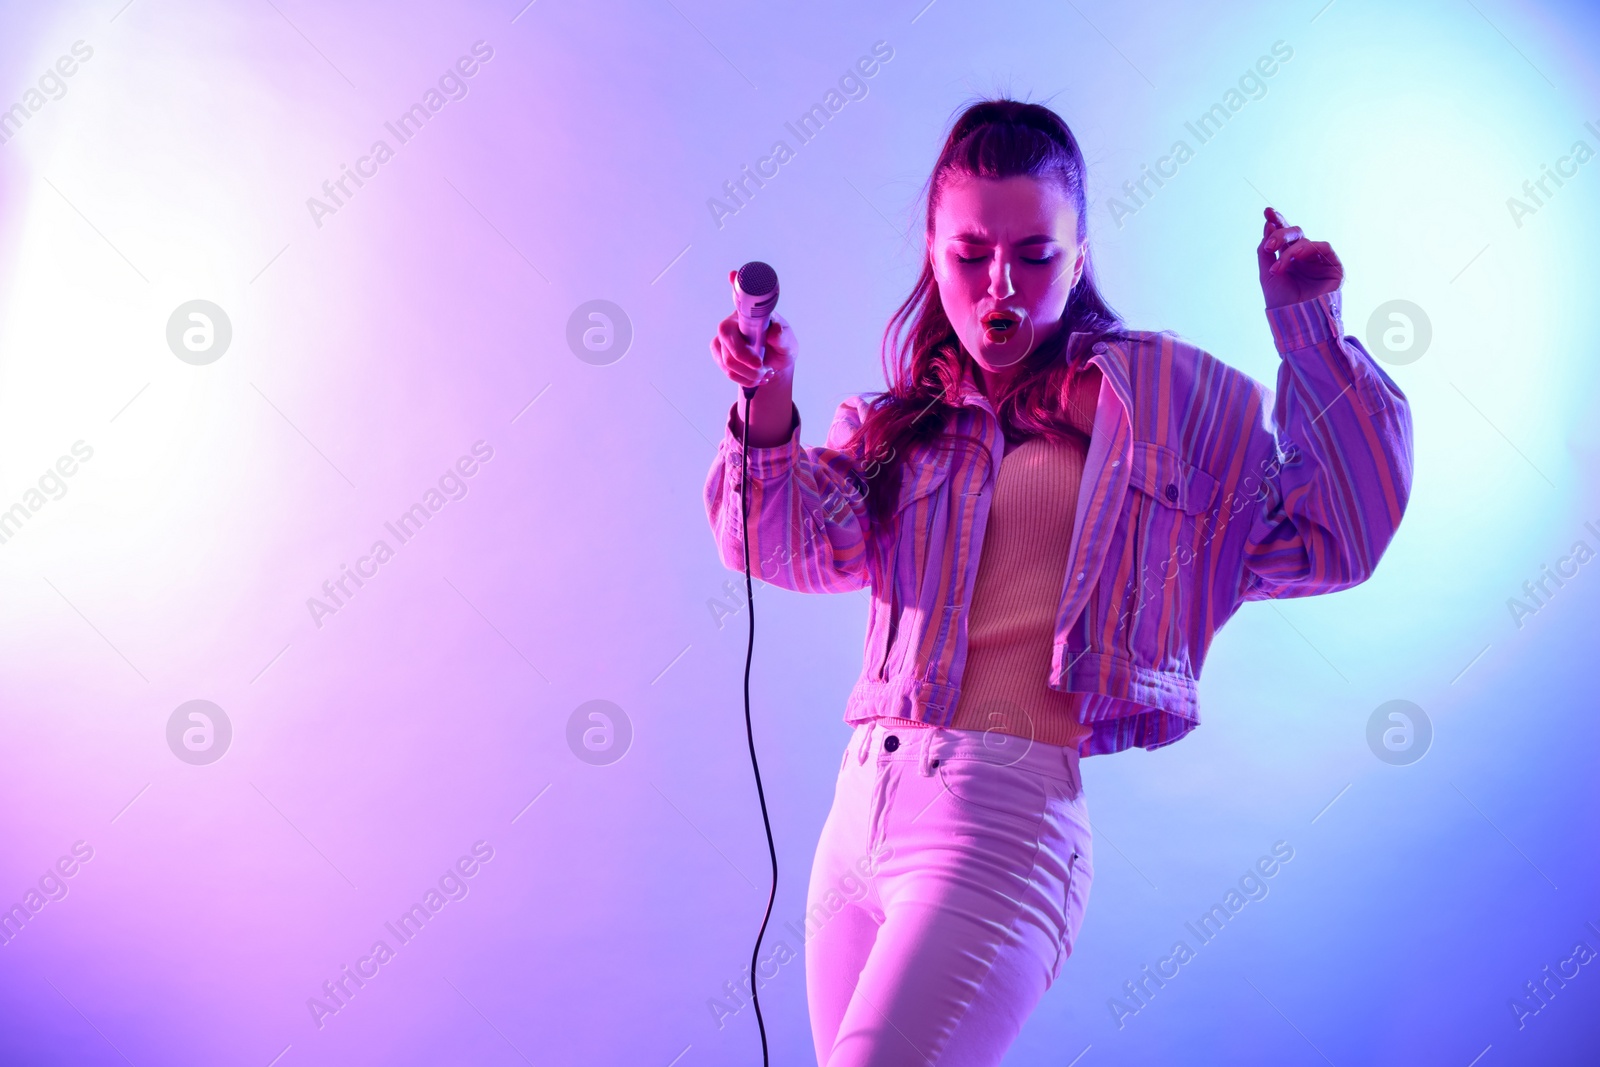 Photo of Beautiful singer with microphone performing on bright background. Space for text